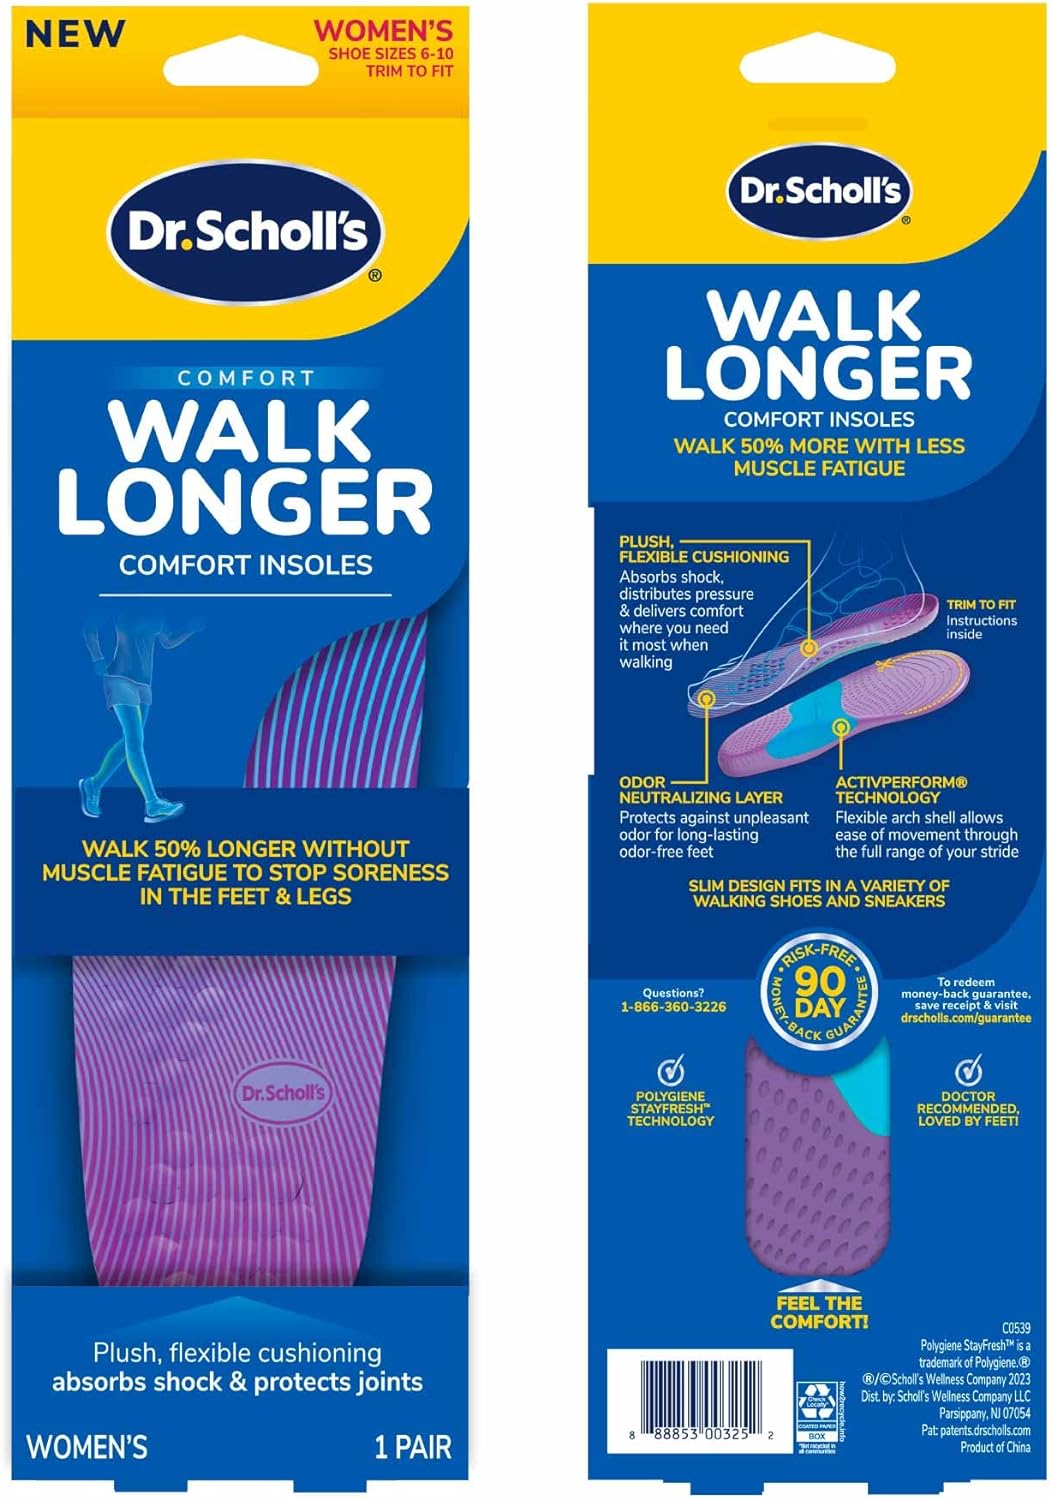 Dr. Scholls Walk Longer Insoles, Comfortable Plush Foam Cushioning Inserts for Walking, Hiking, and Standing on Feet All-Day, Stop Soreness in Feet  Legs, Trim to Fit Womens Shoe Size 6-10, 1 Pair